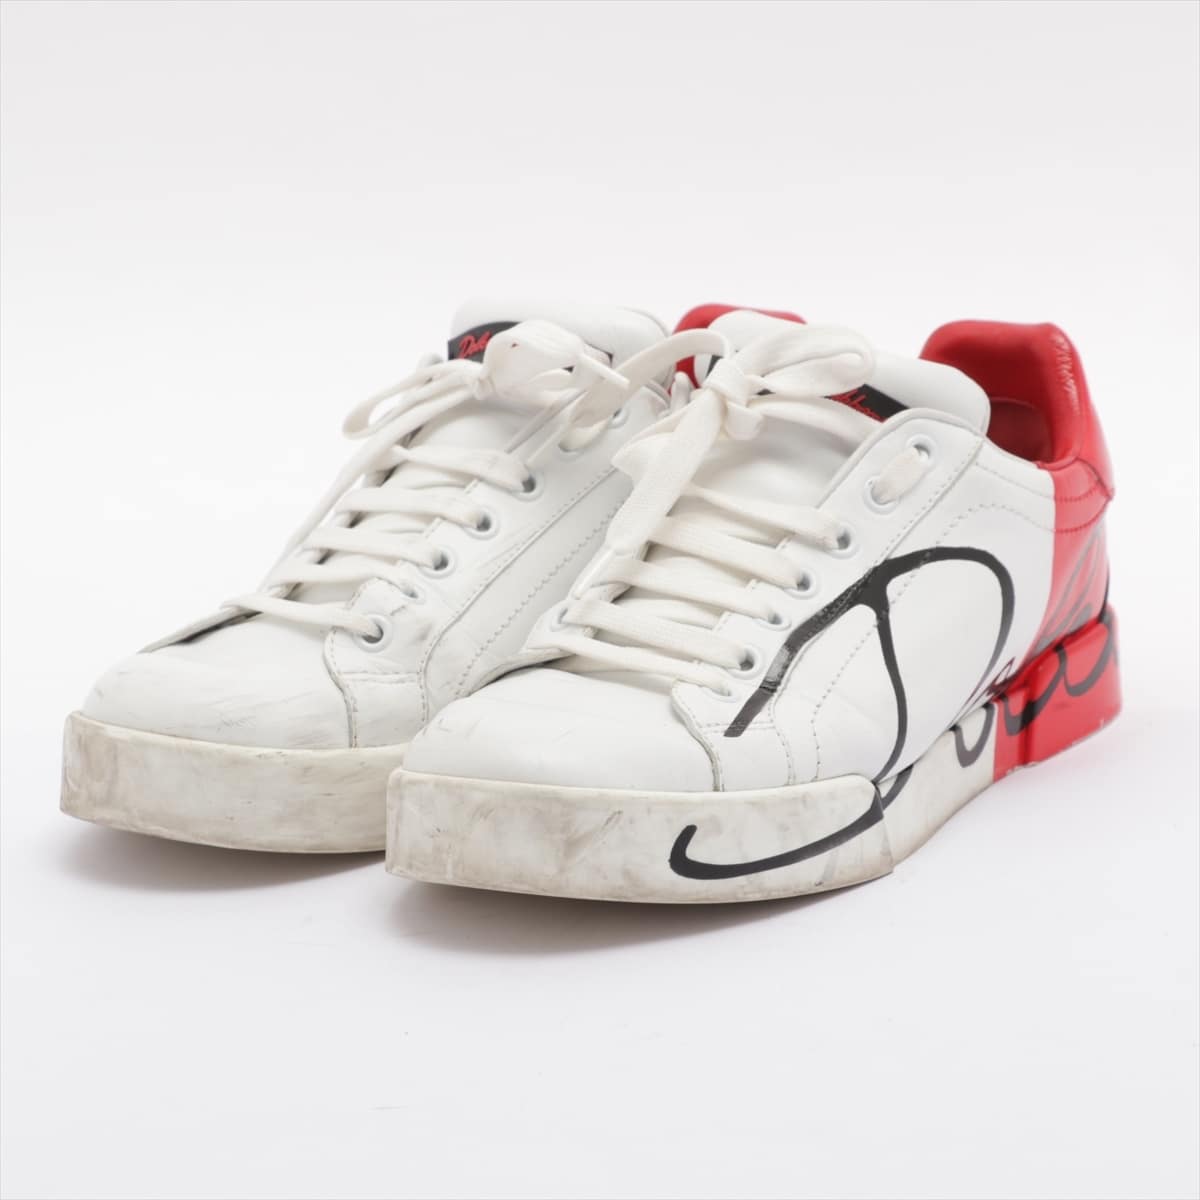 Dolce & Gabbana Leather Sneakers 38.5 Ladies' Red x white